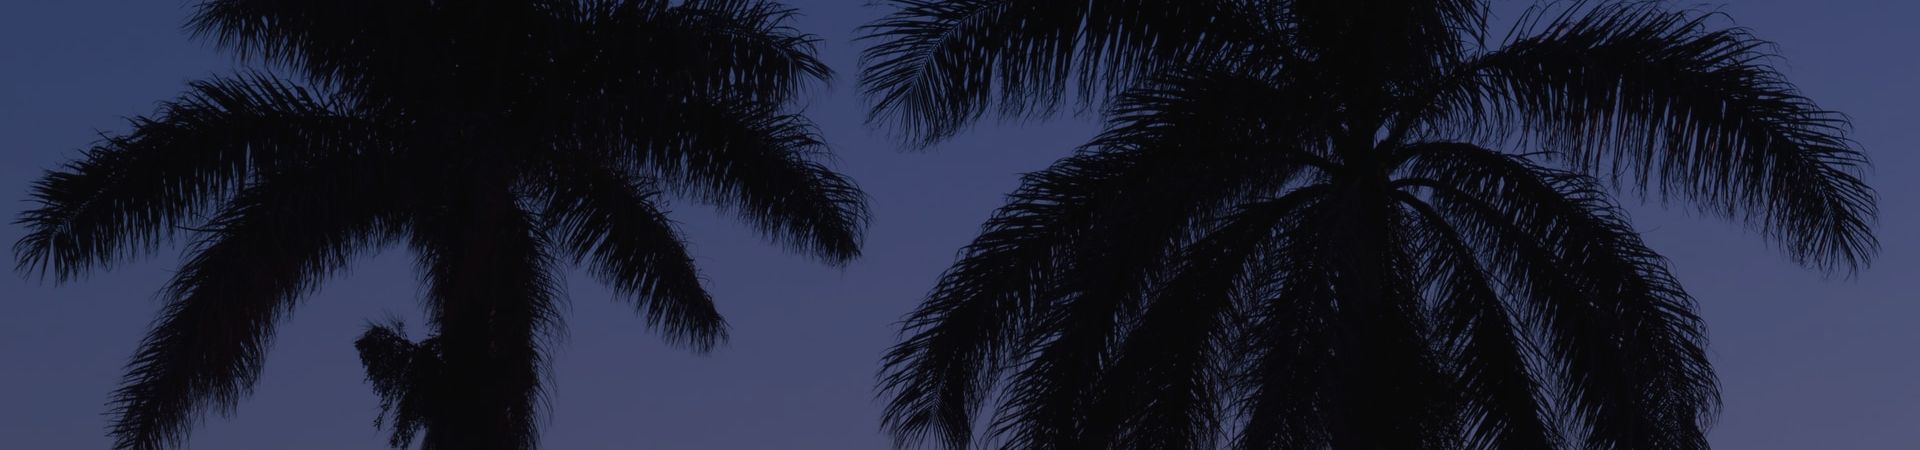 palm trees in the evening